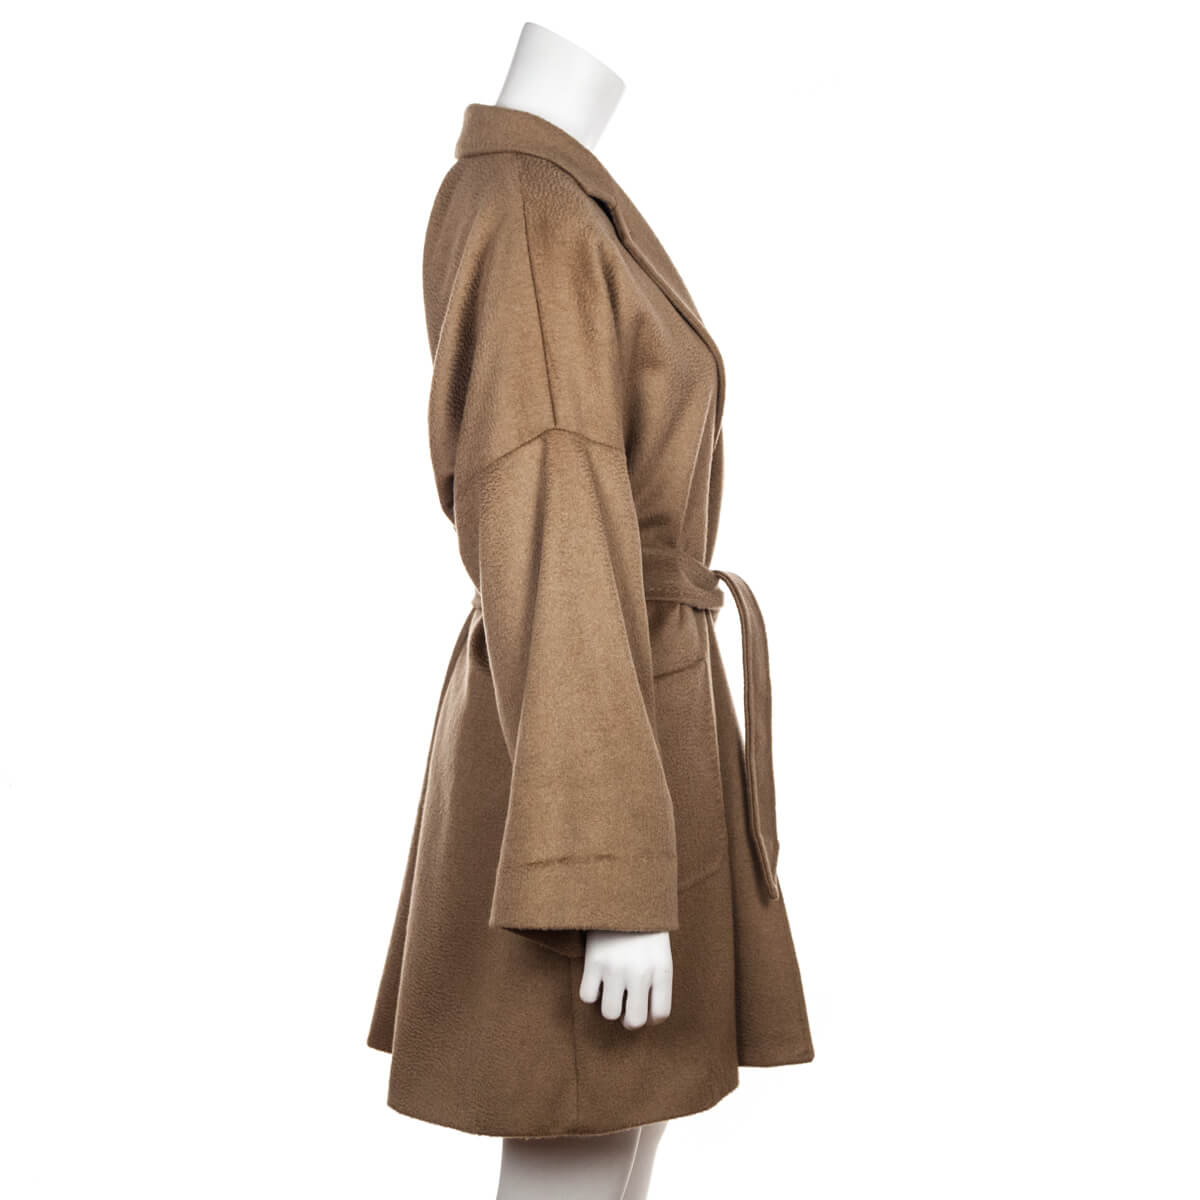 Max Mara Tan Camel Hair Belted Coat Size L | US 10 | IT 44 - Love that Bag etc - Preowned Authentic Designer Handbags & Preloved Fashions